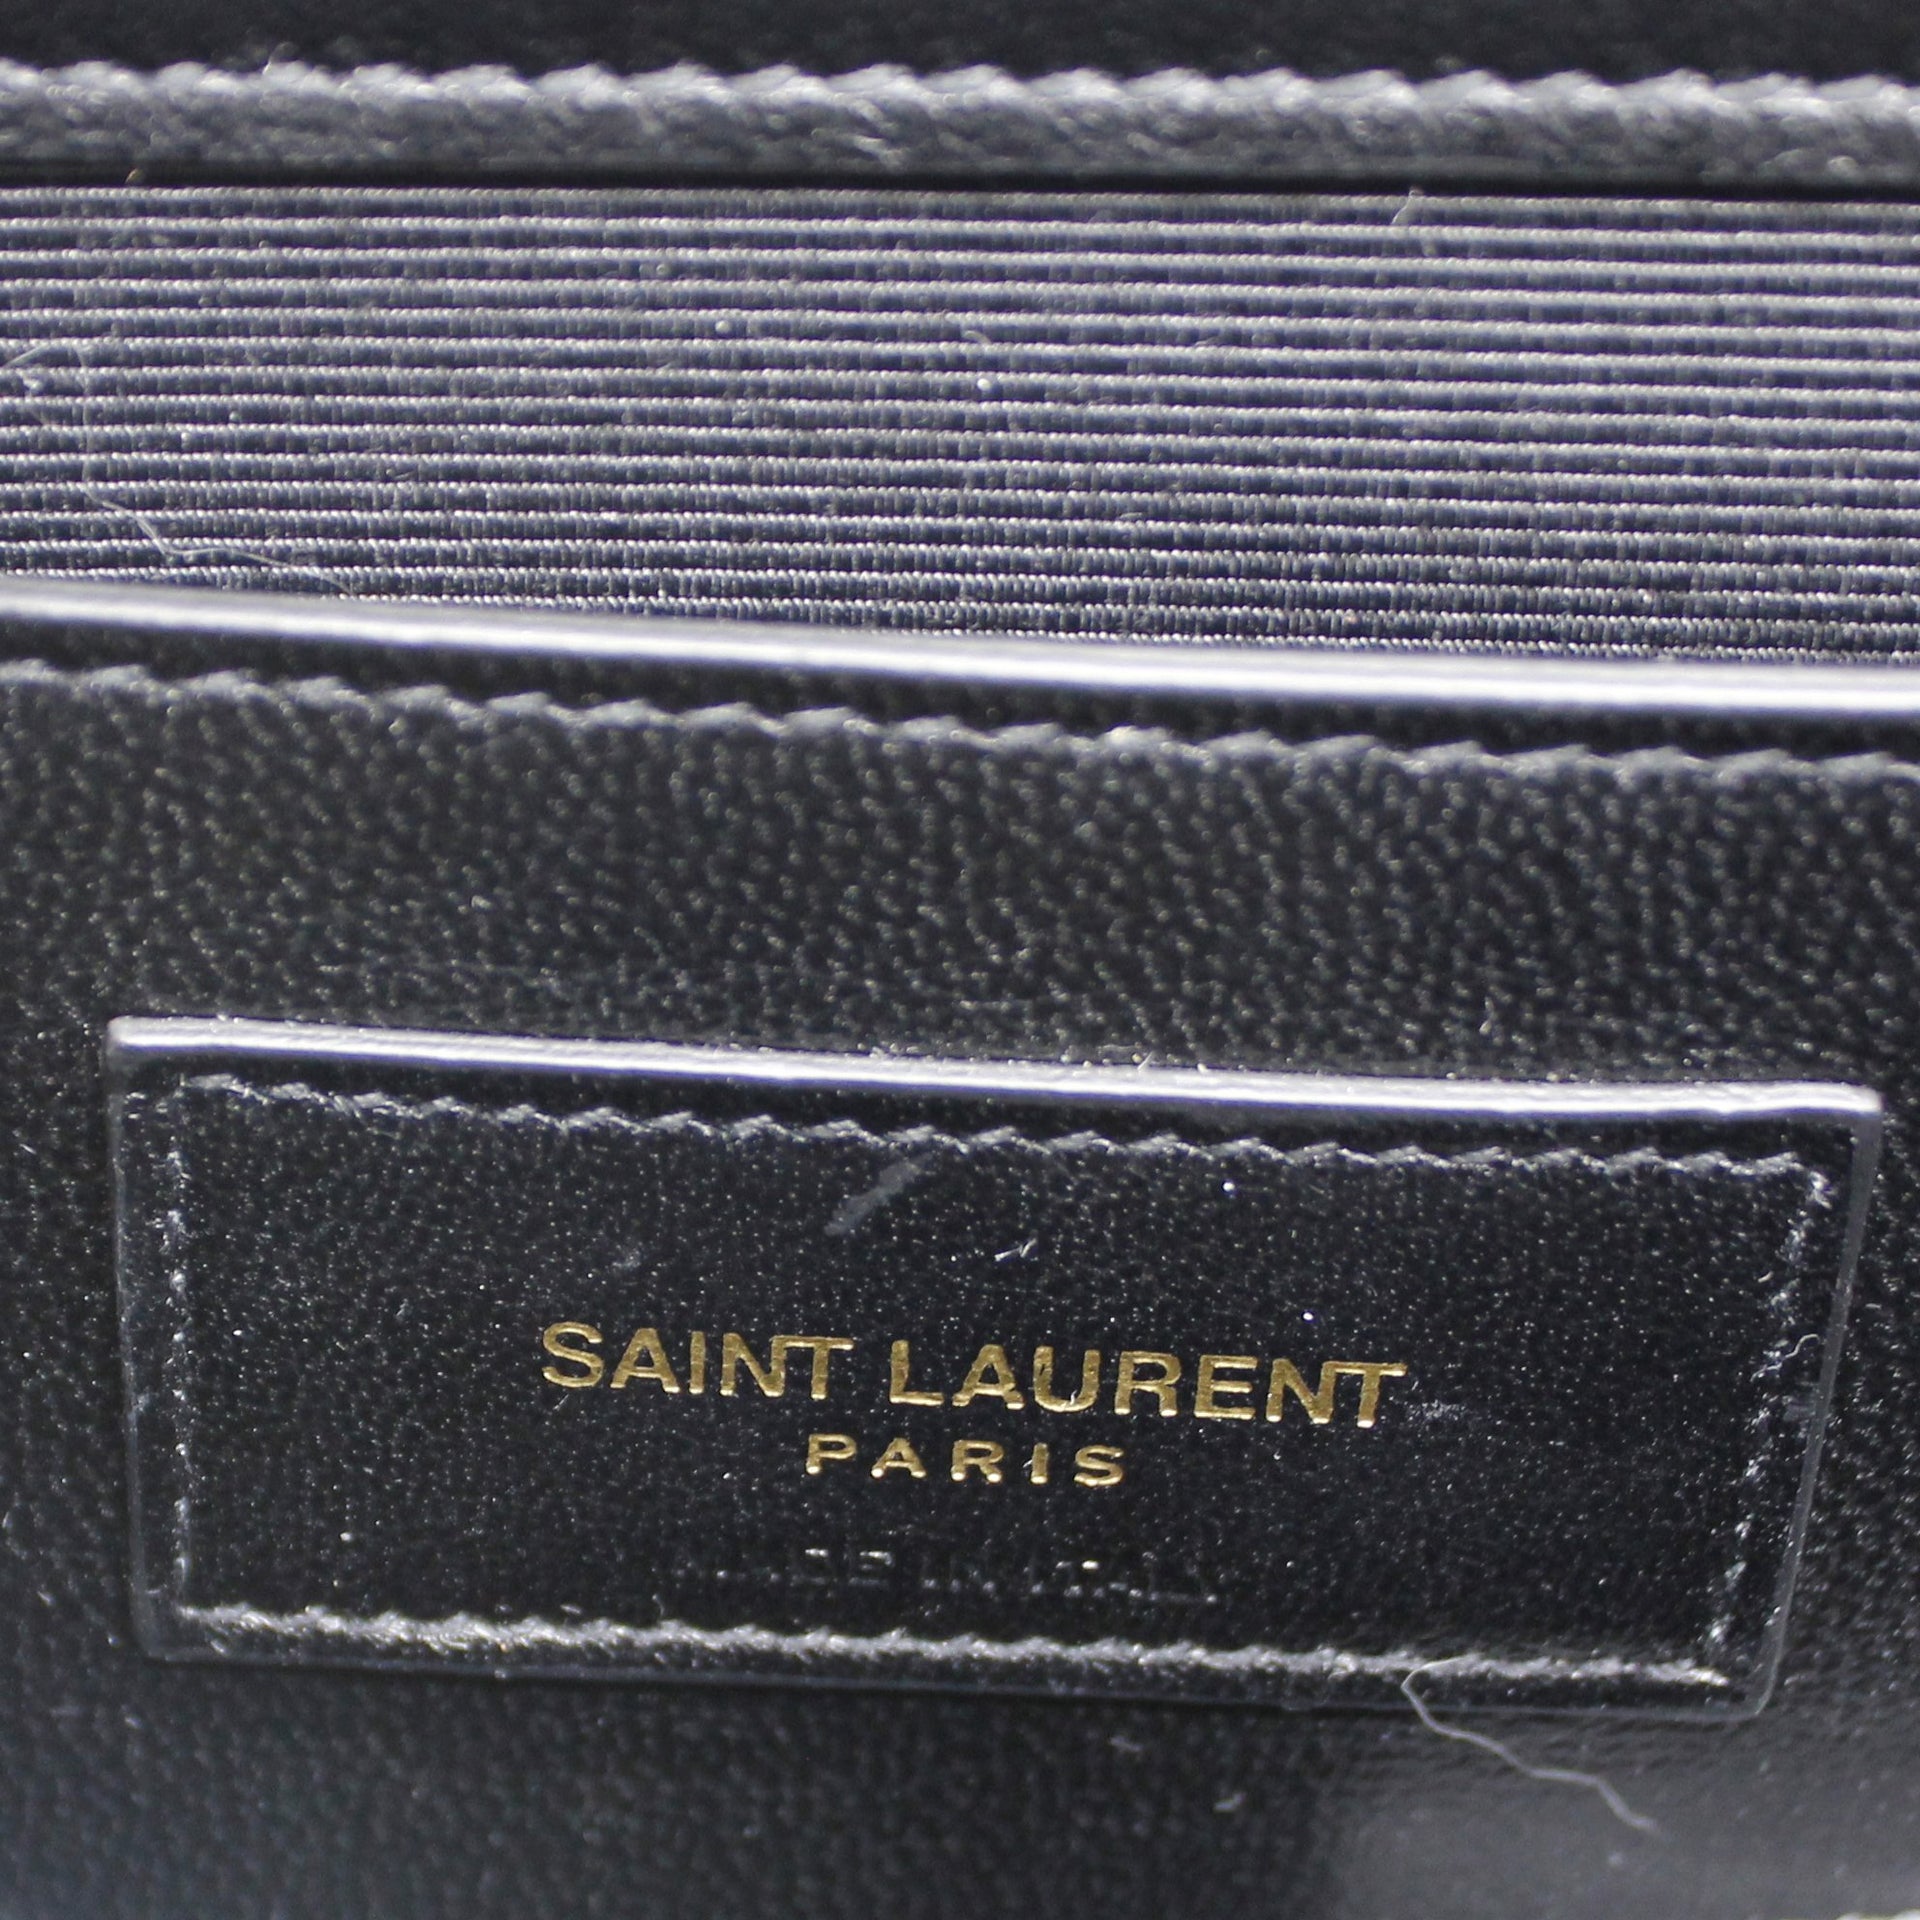 Saint Laurent bag real vs fake. How to spot counterfeit YSL Kate